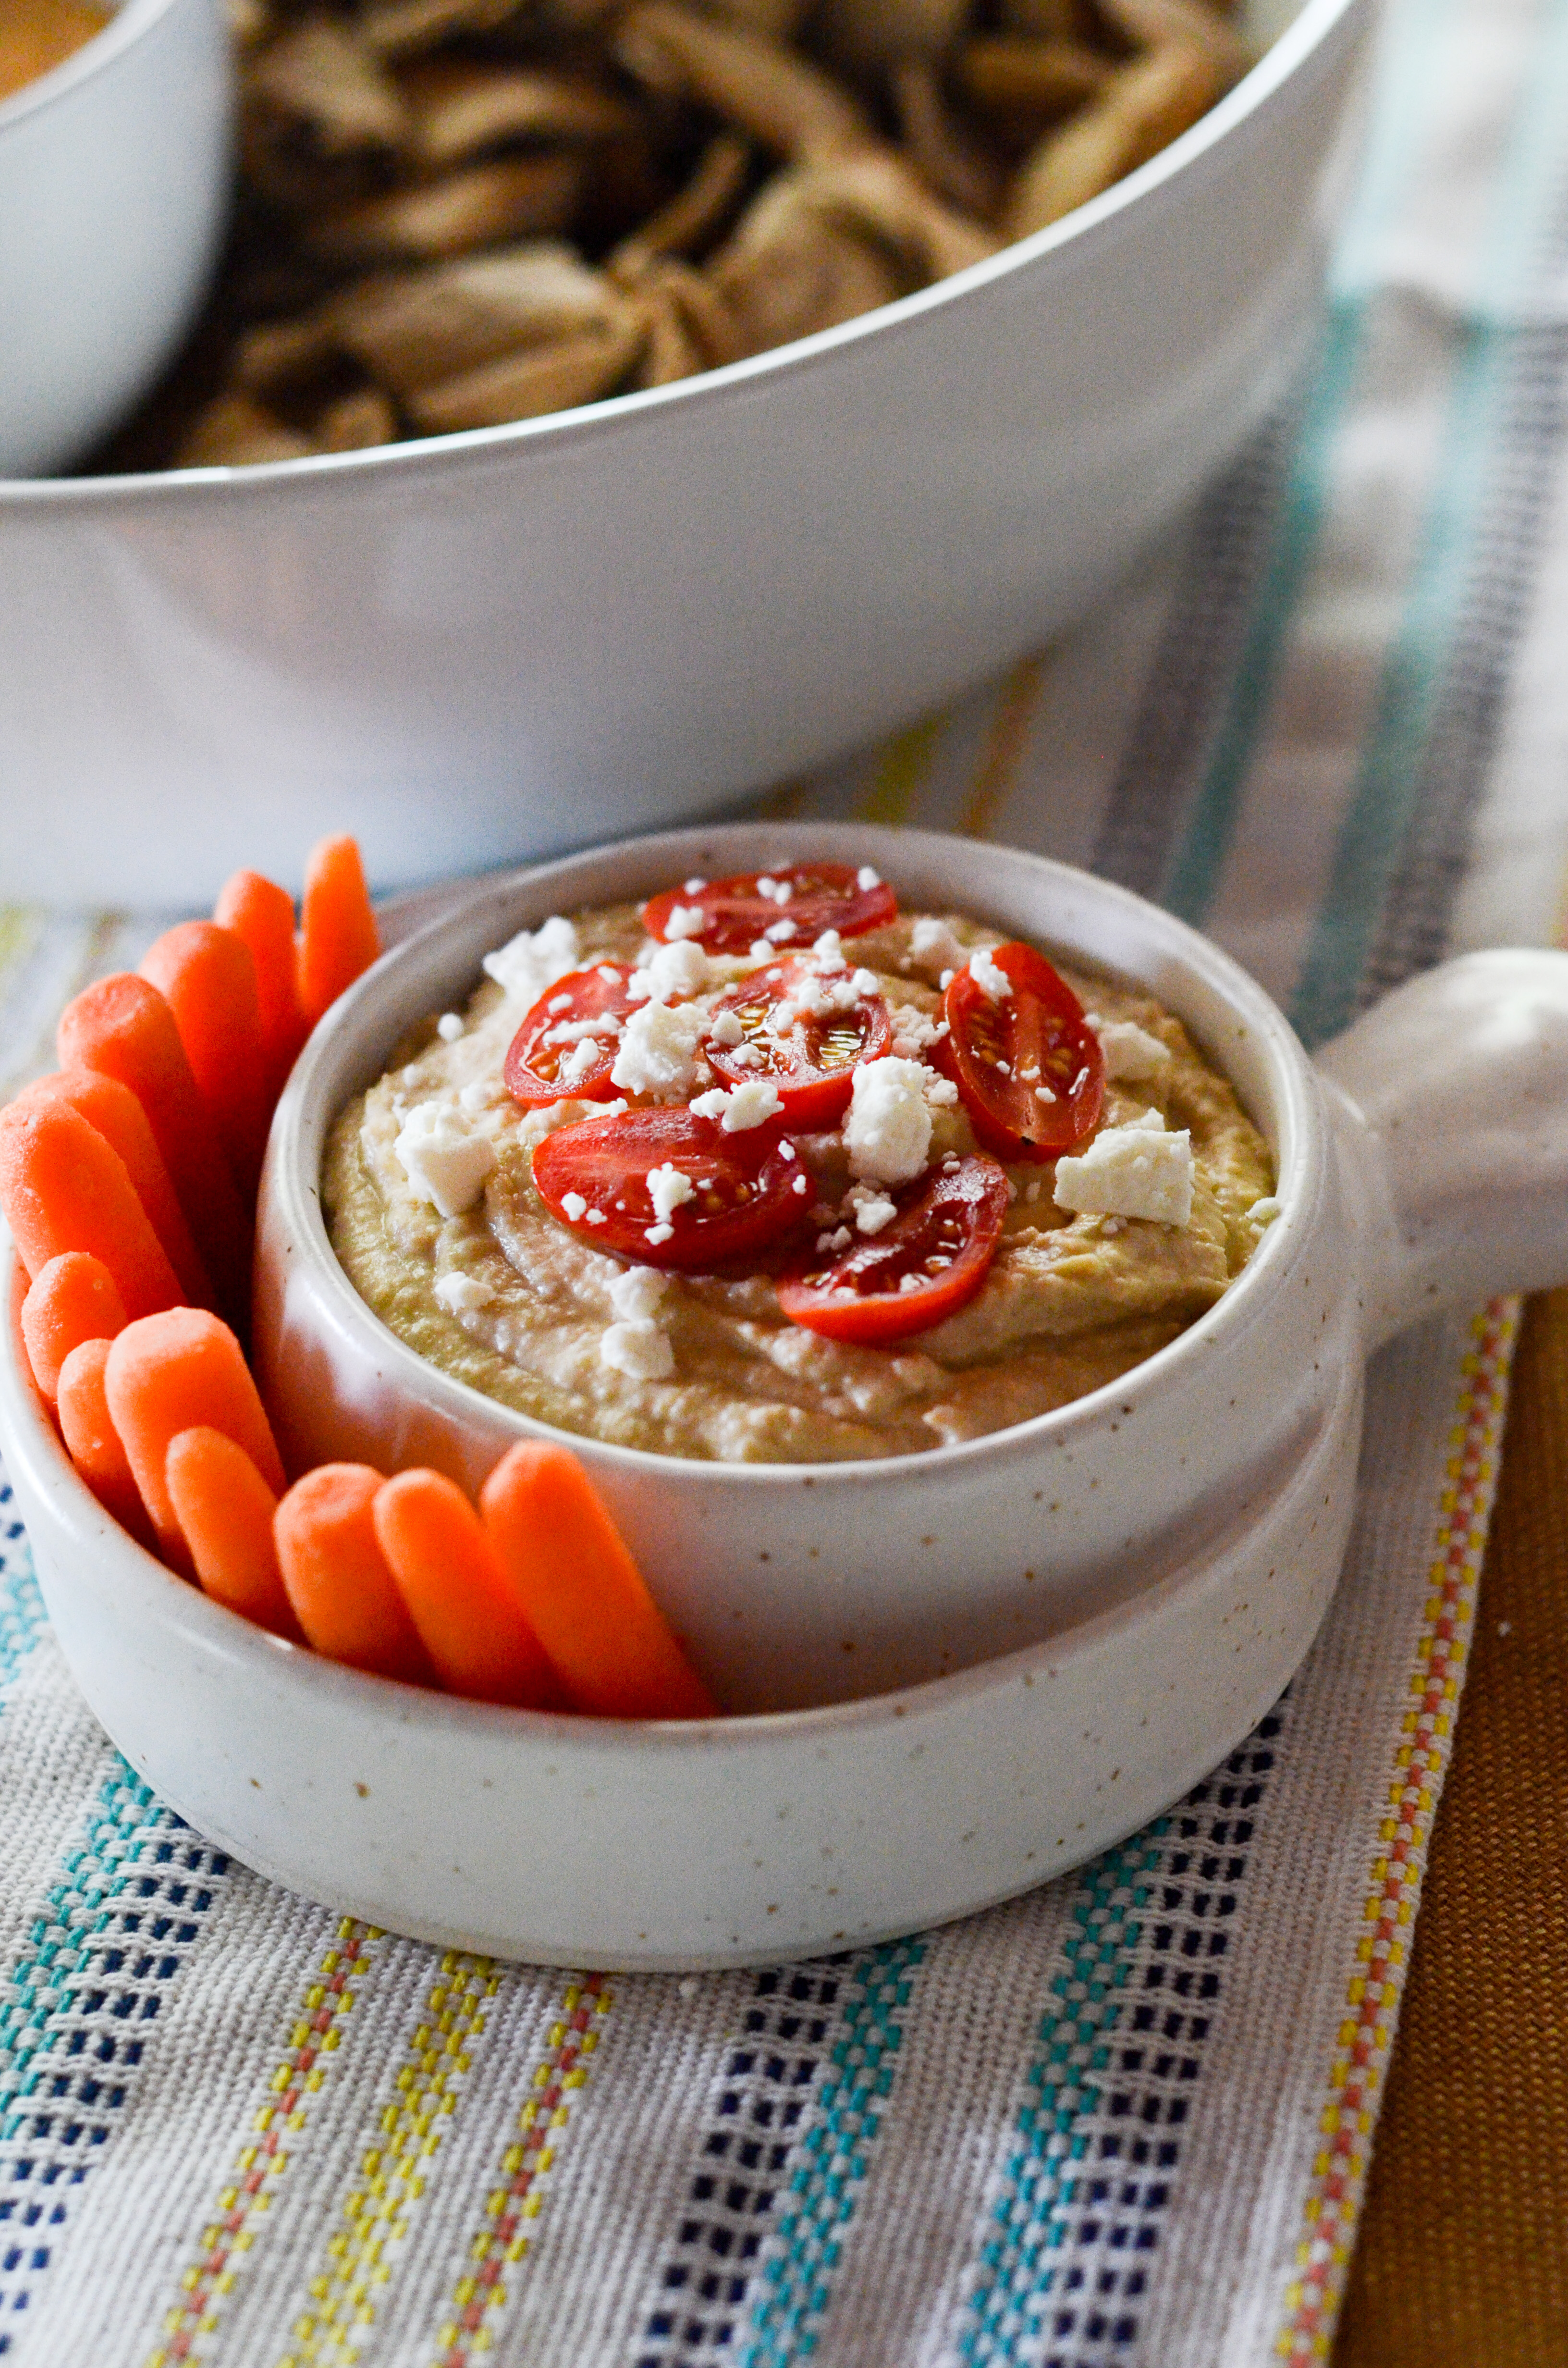 lebanese hummus in white dip bowl with carrots